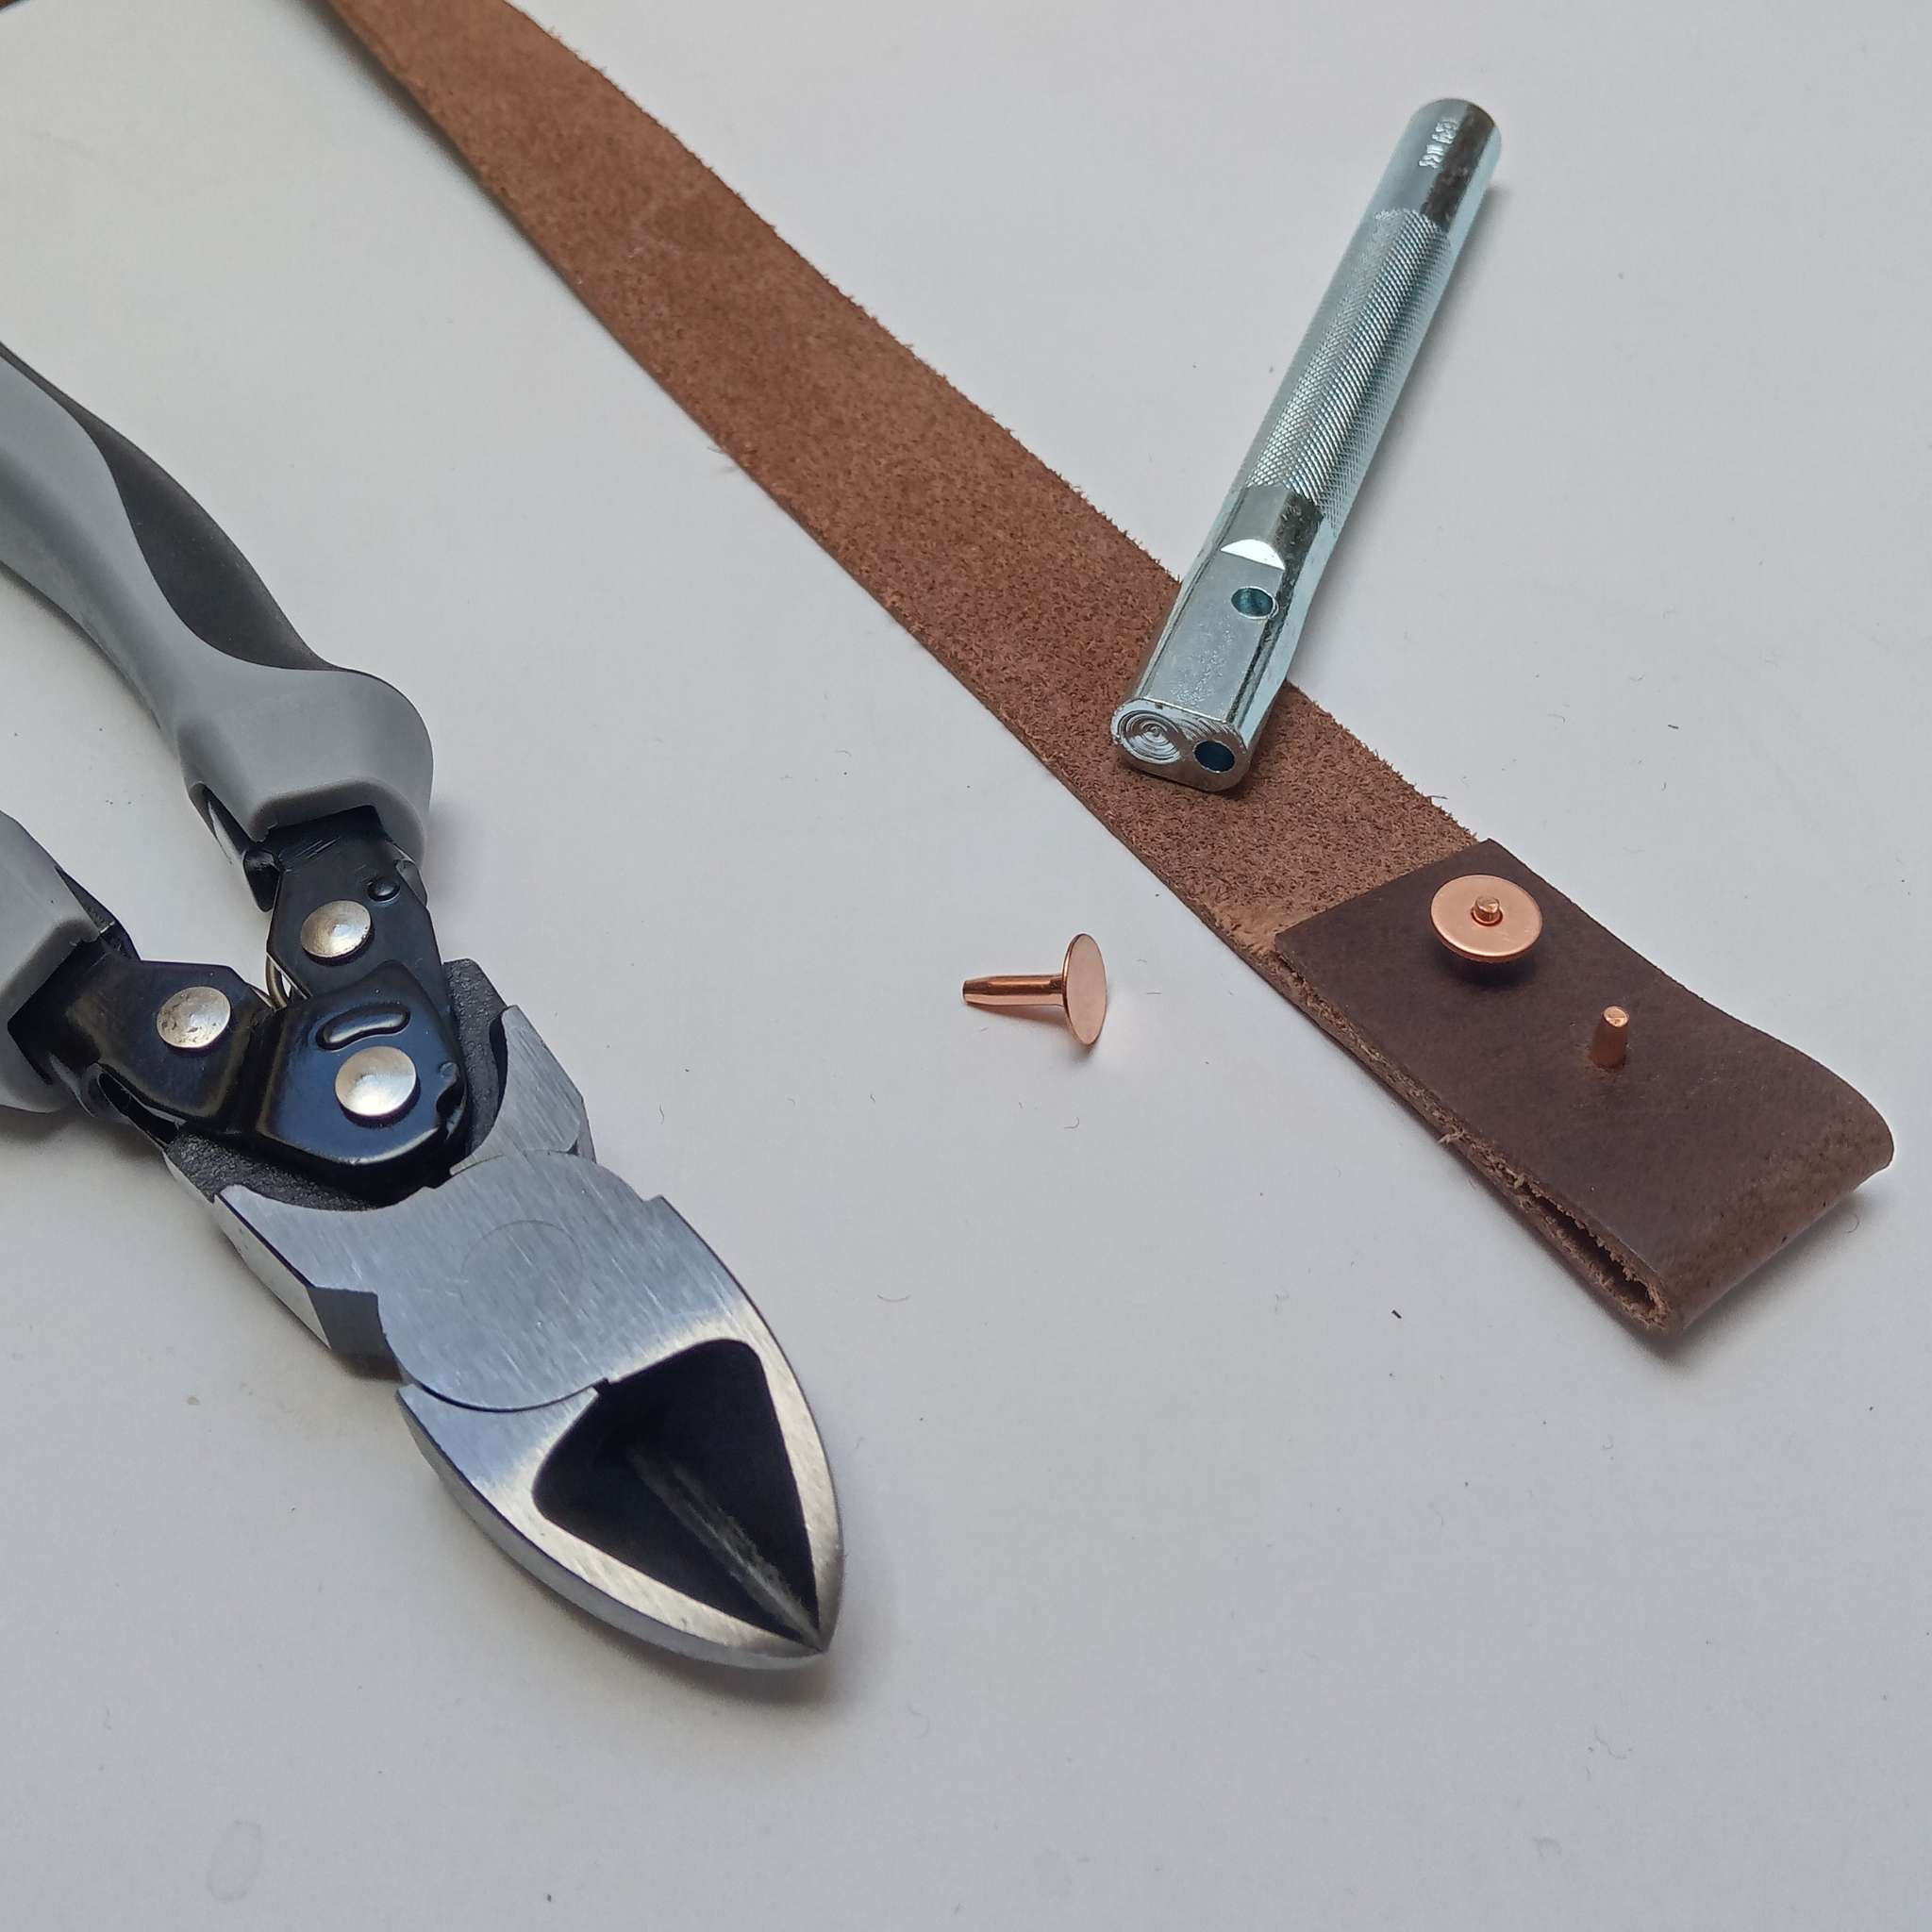 These handy rivet pliers are heavy duty and strong enough to snip through all rivet posts when trimming or cutting is required.  For use with the traditional style rivets size #9, #12 and size #14.  They can also be used to remove set rivets for repair work.